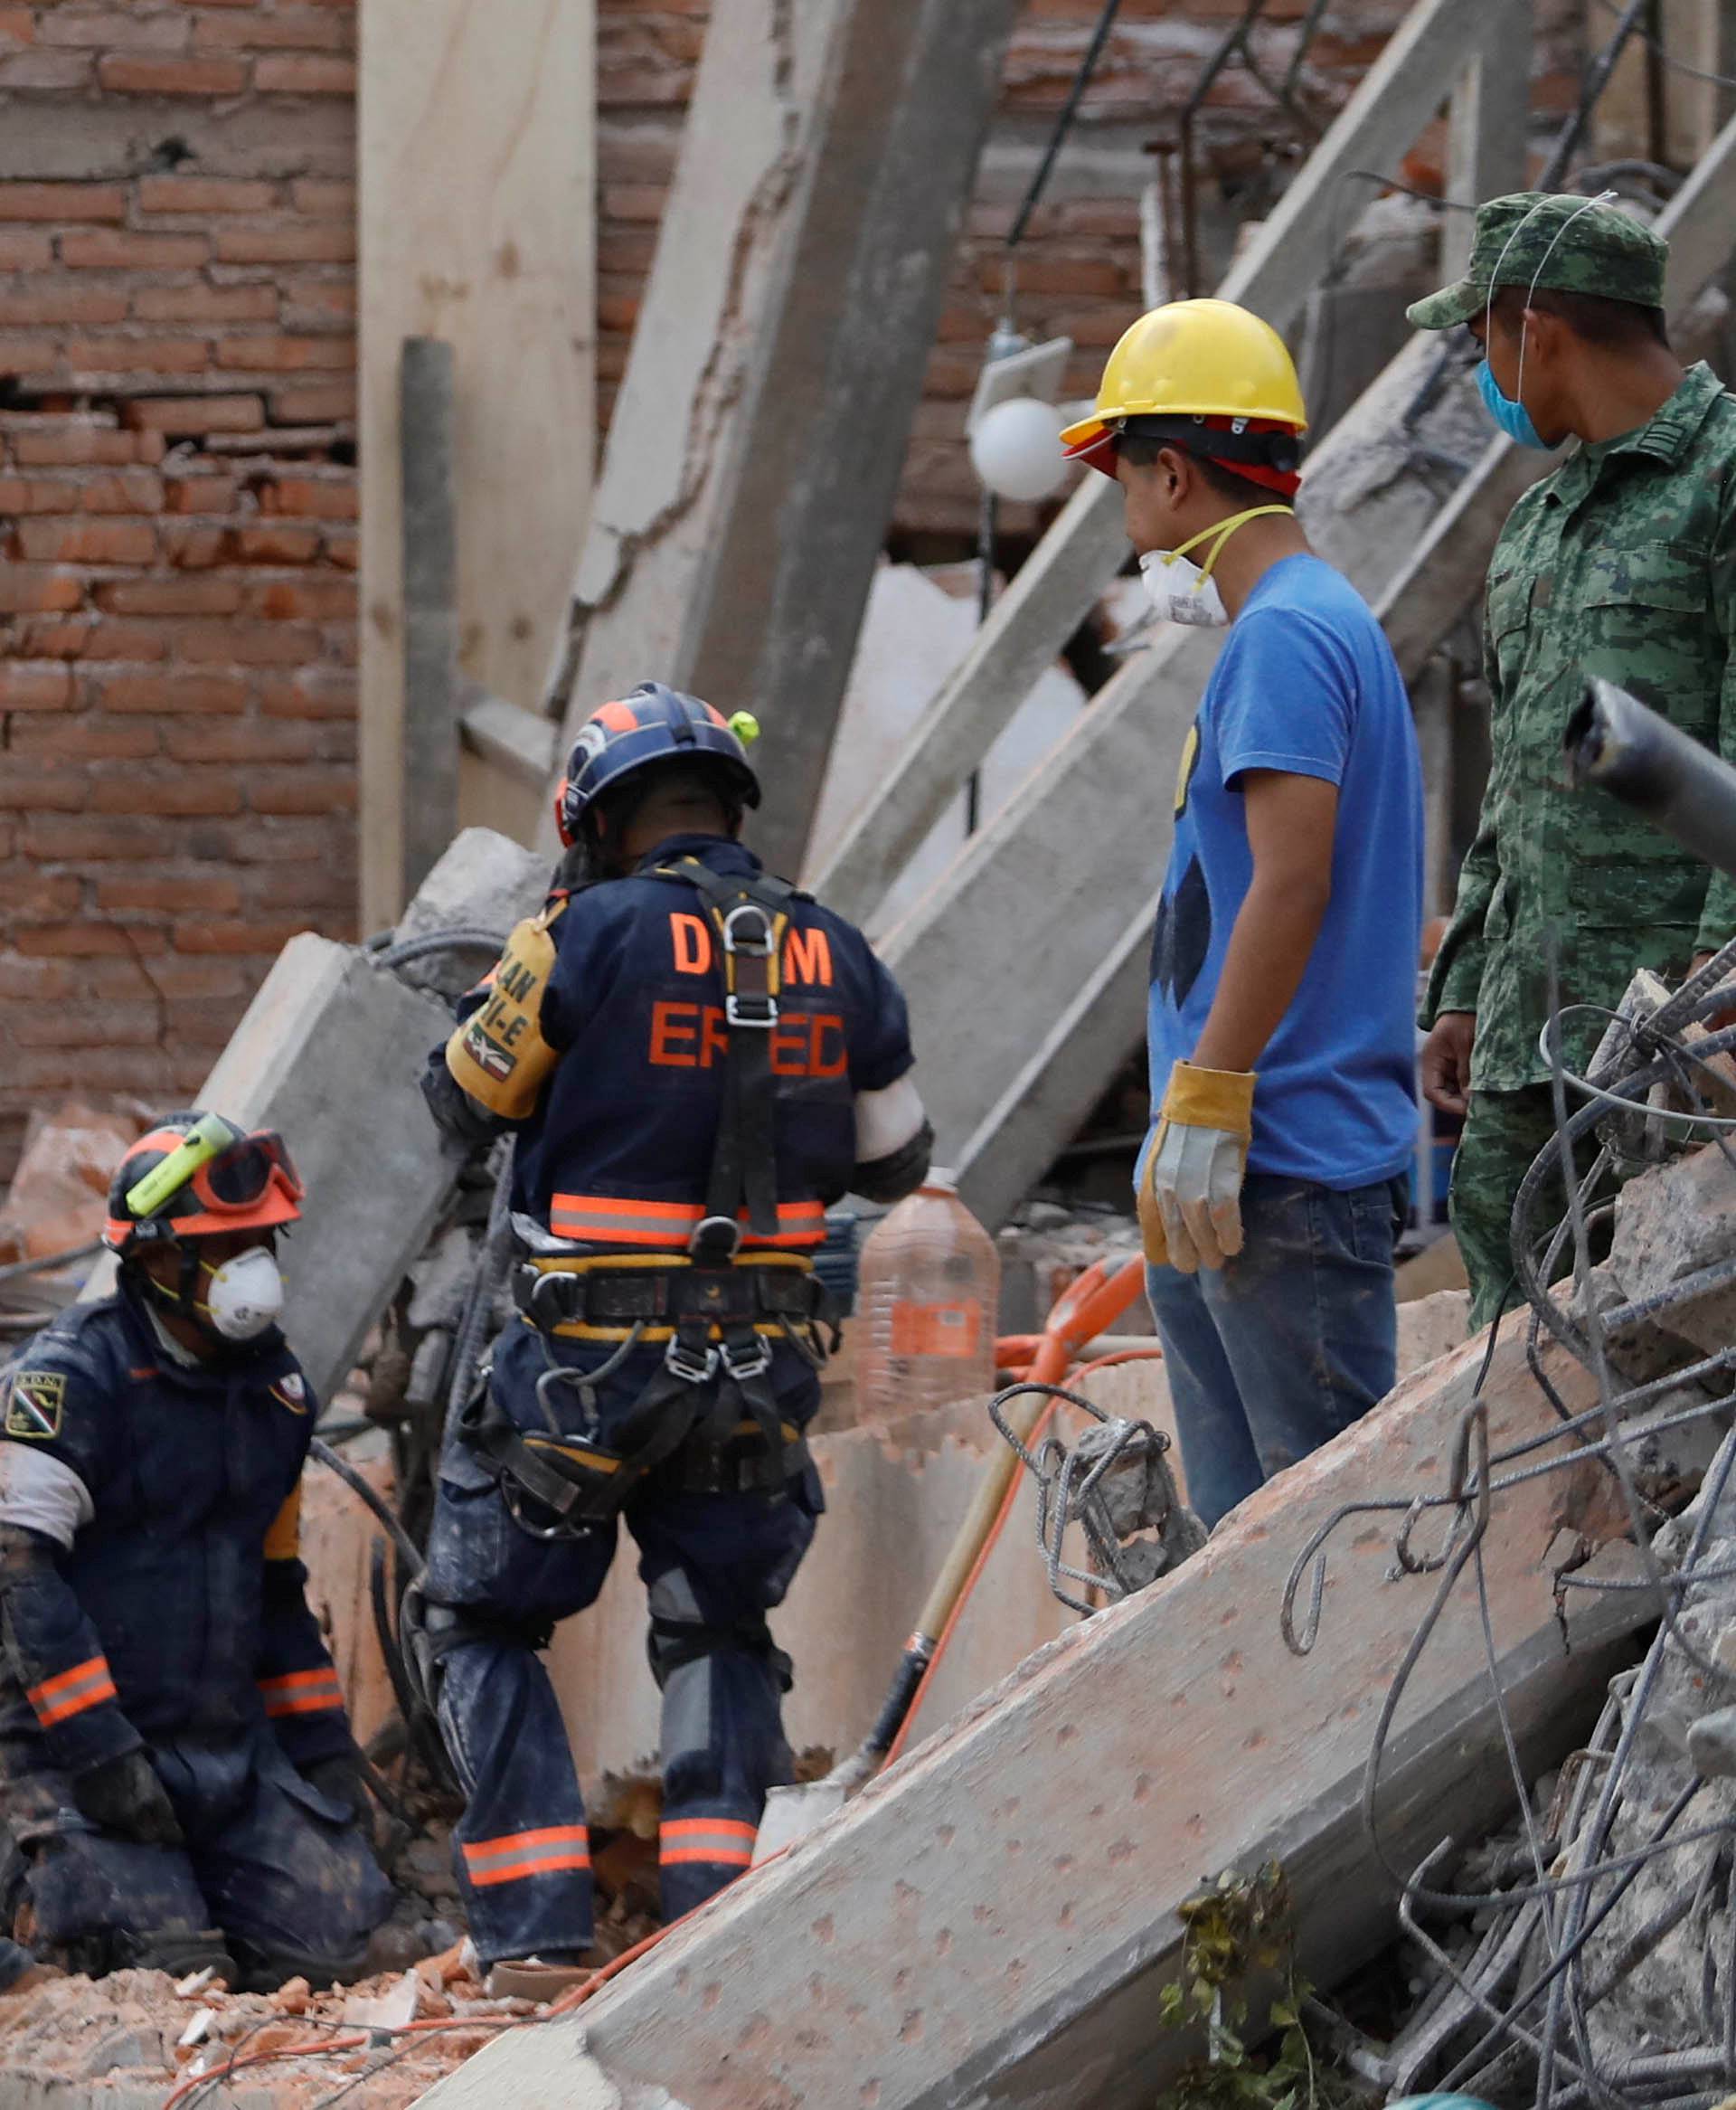 Rescue workers search through the rubble for students at Enrique Rebsamen school in Mexico City